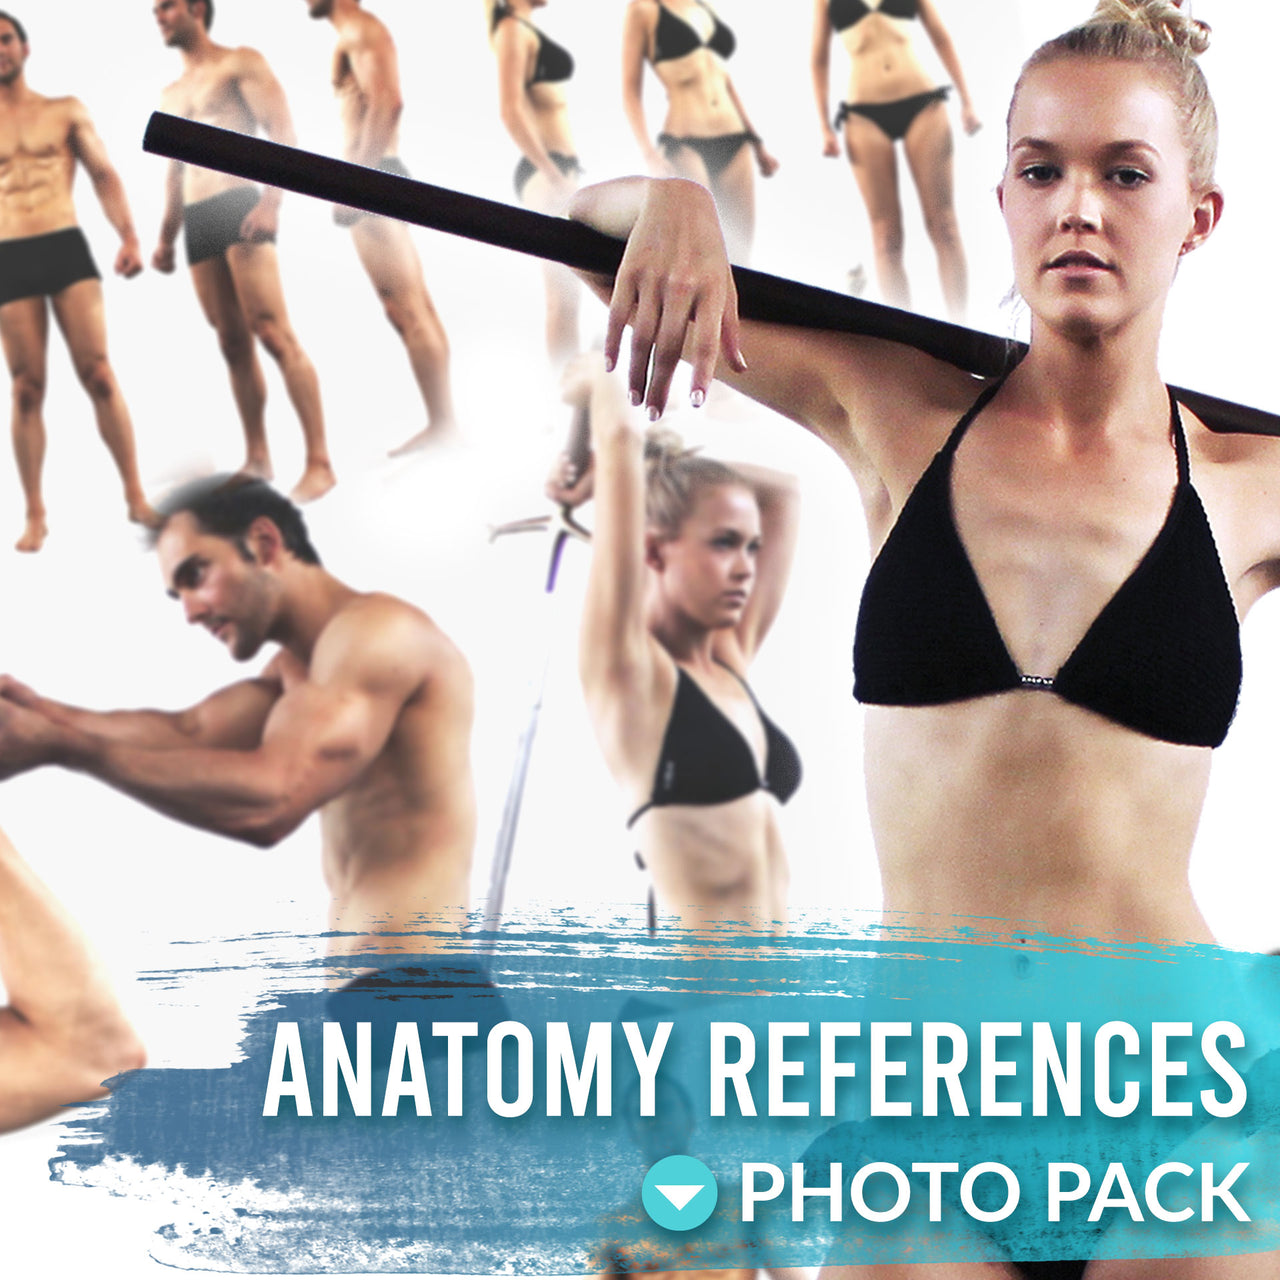 The Anatomy Reference Pack